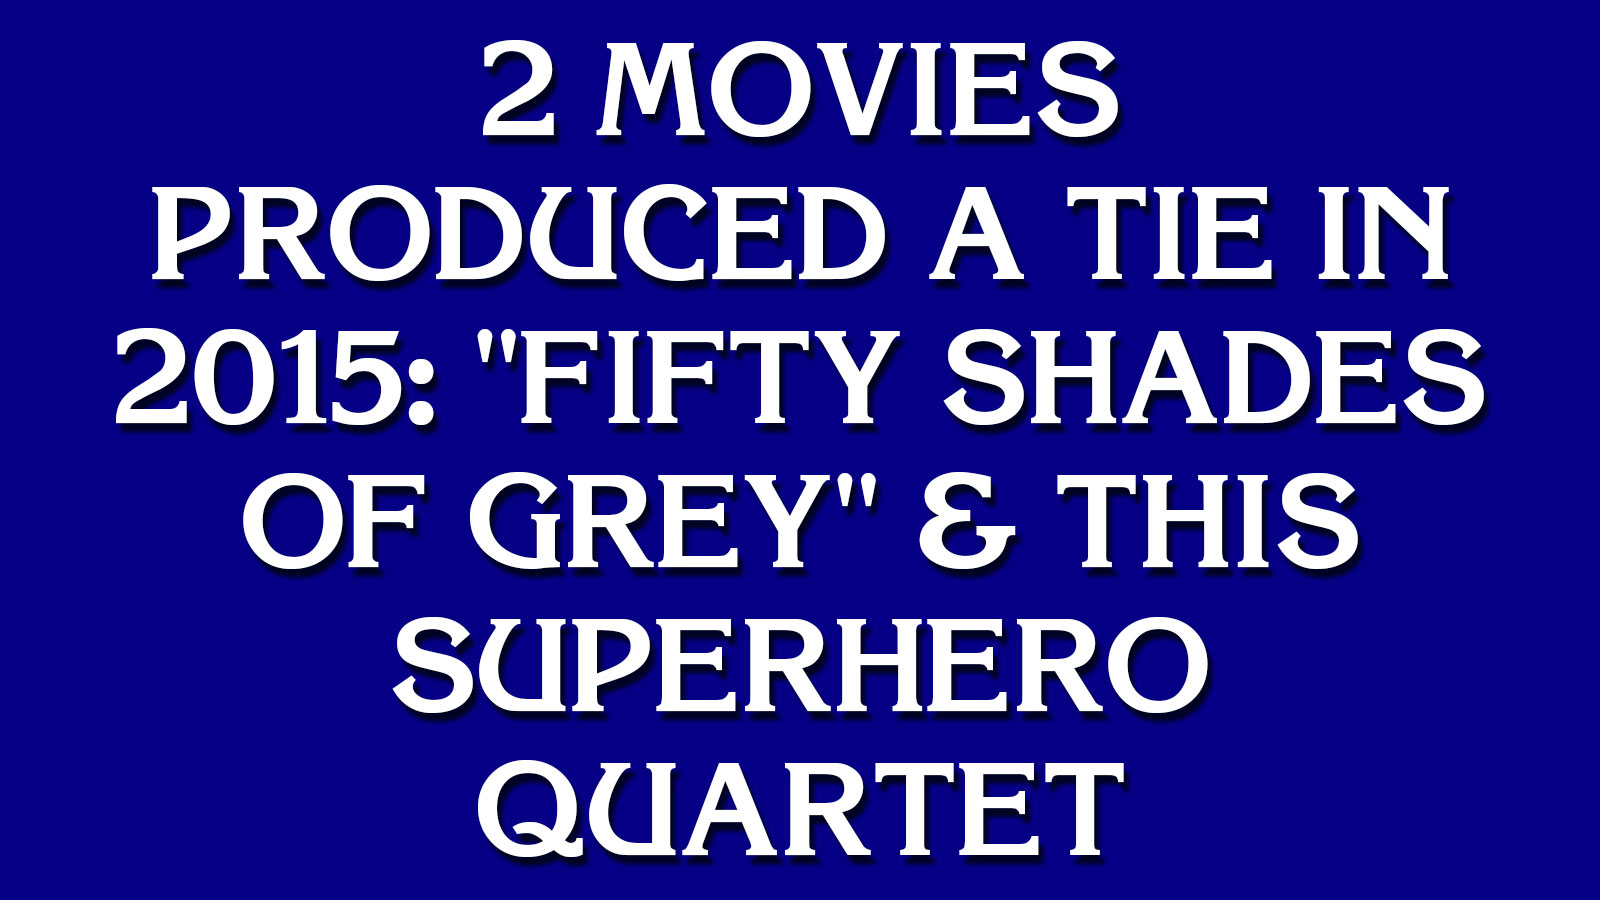 Can You Go on “Jeopardy!”? 18